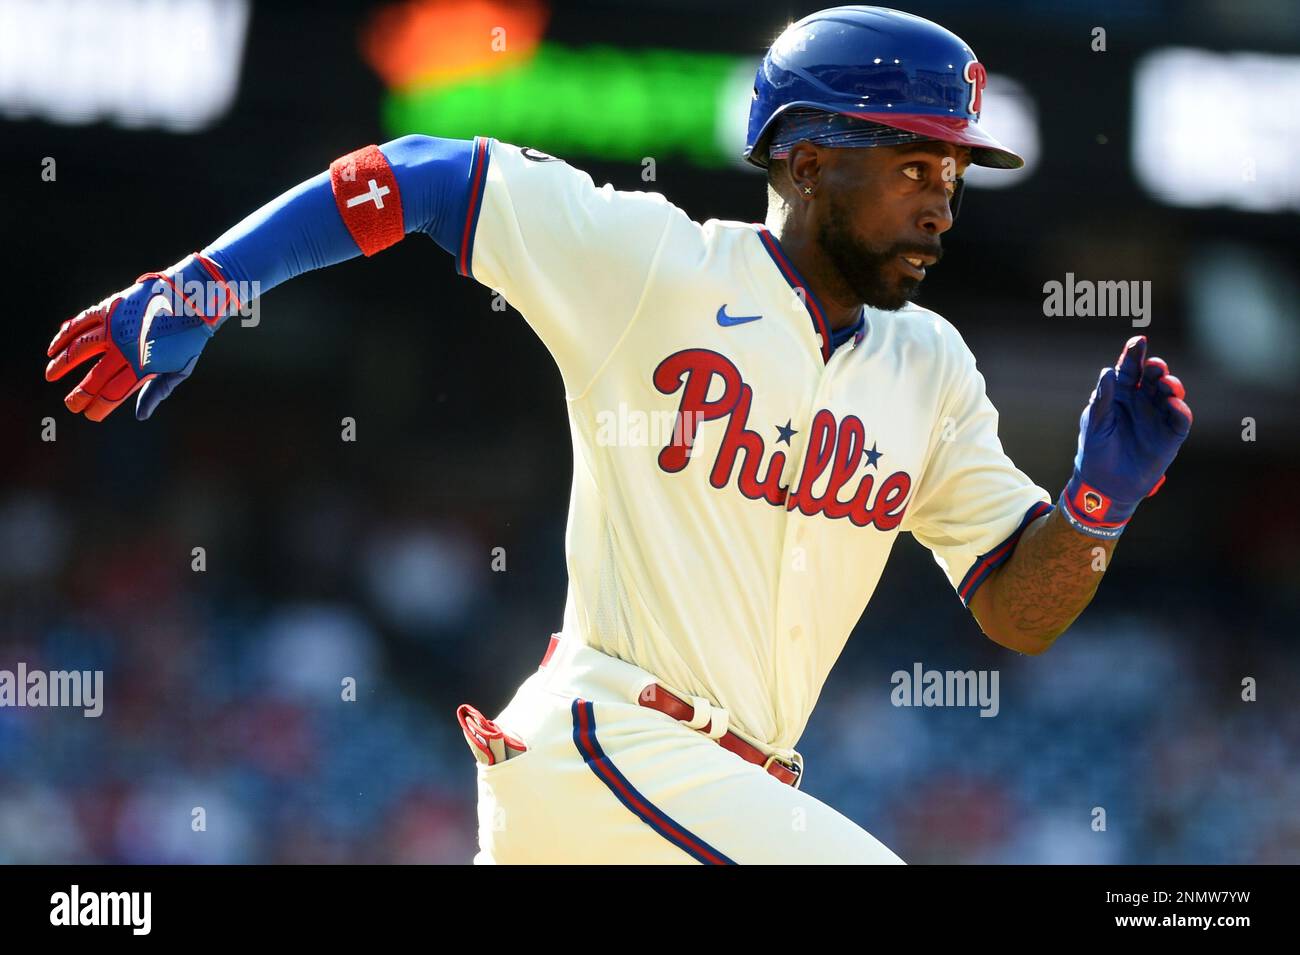 PHILADELPHIA, PA - AUGUST 15: Philadelphia Phillies left fielder Andrew  McCutchen (22) on the base path during the Major League Baseball game  between the Cincinnati Reds and Philadelphia Phillies on August 15